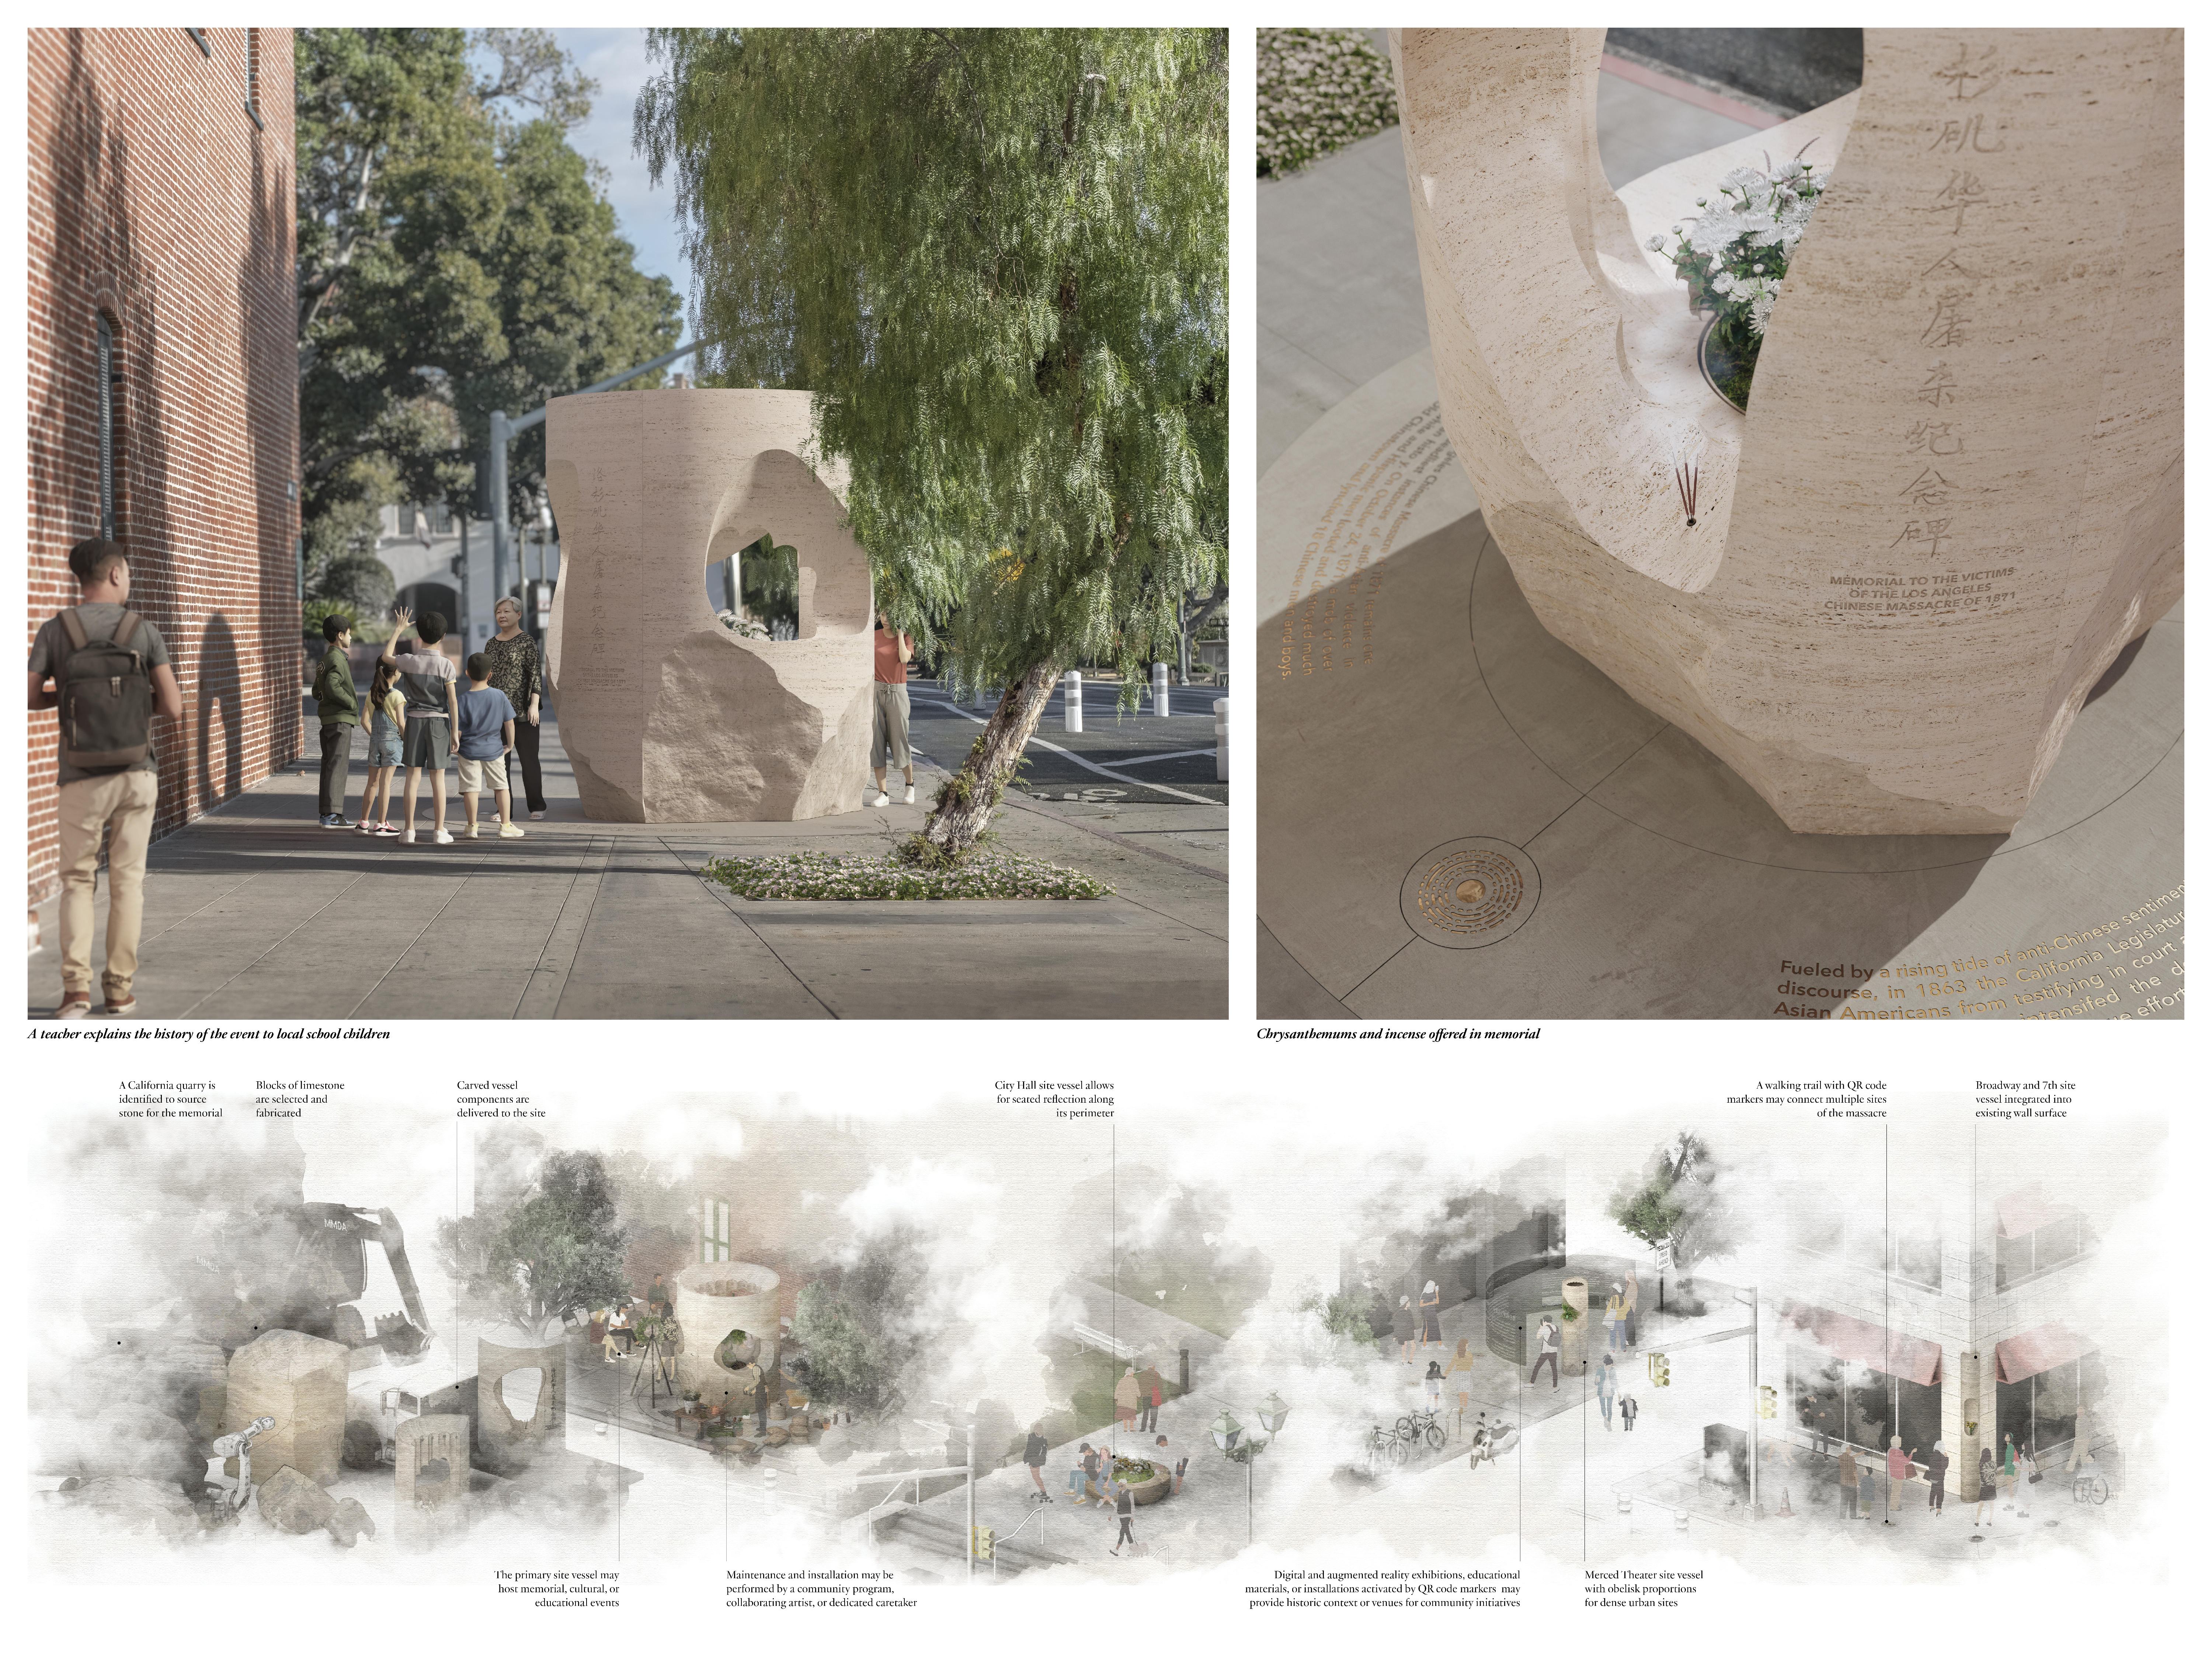 Proposed Concept of Memorial to the Victims of the 1871 Chinese Massacre. Figure x J. Jih. Architecture Collective, led by James Leng and Jennifer Ly in collaboration with J. Roc Jih, San Francisco, CA